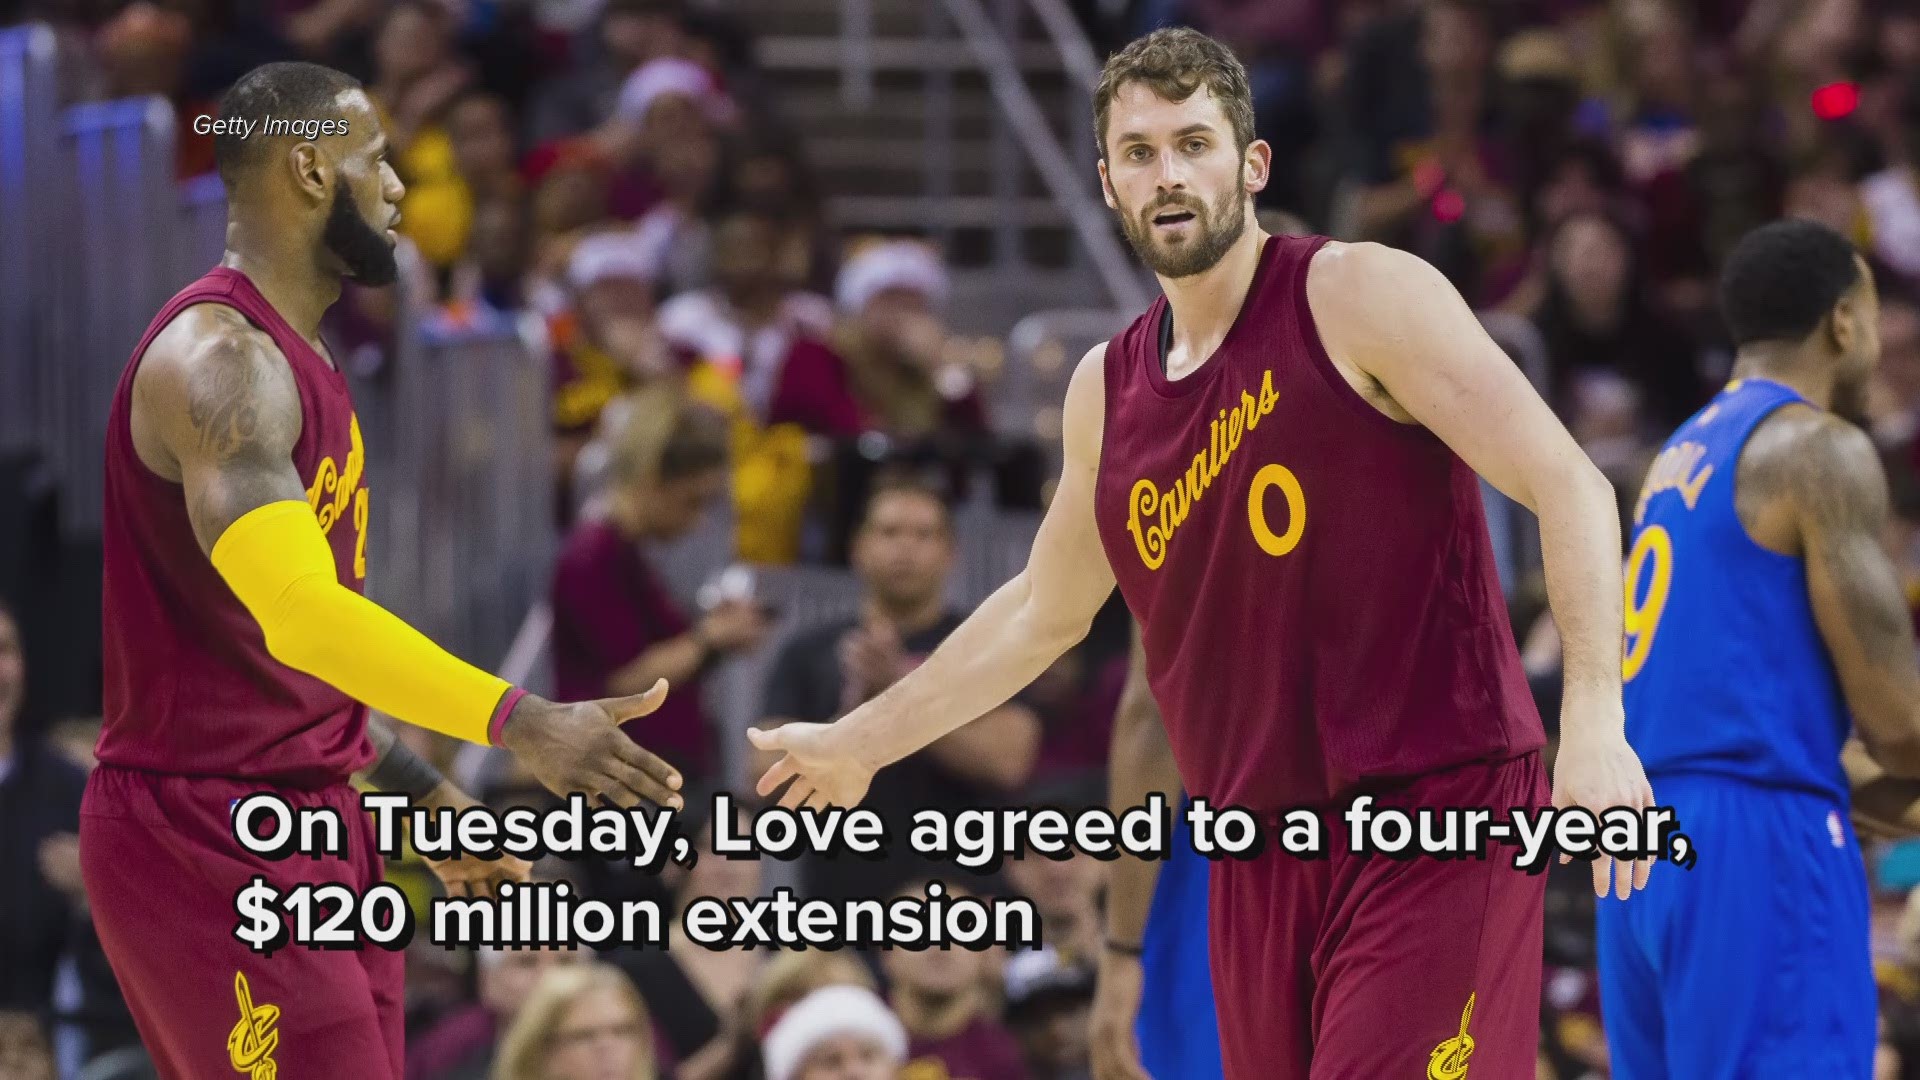 Kevin Love posts photo with former Cleveland Cavaliers teammate LeBron James